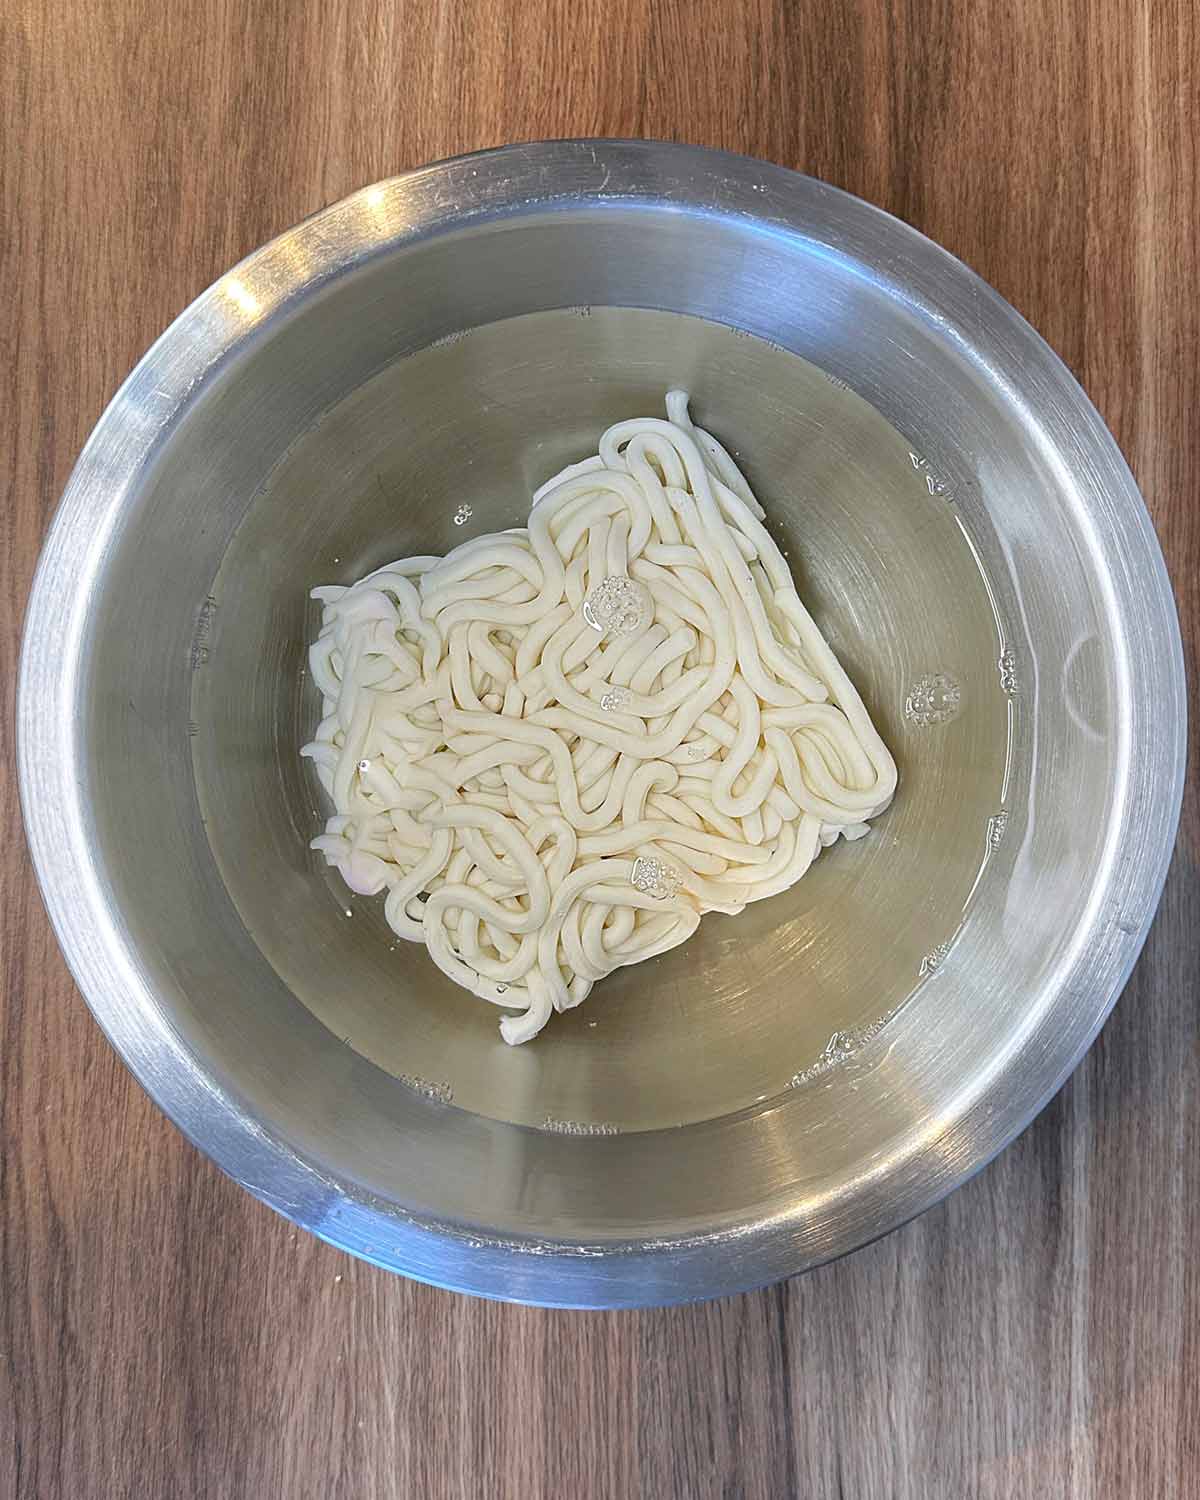 Udon noodles soaking in a bowl of water.